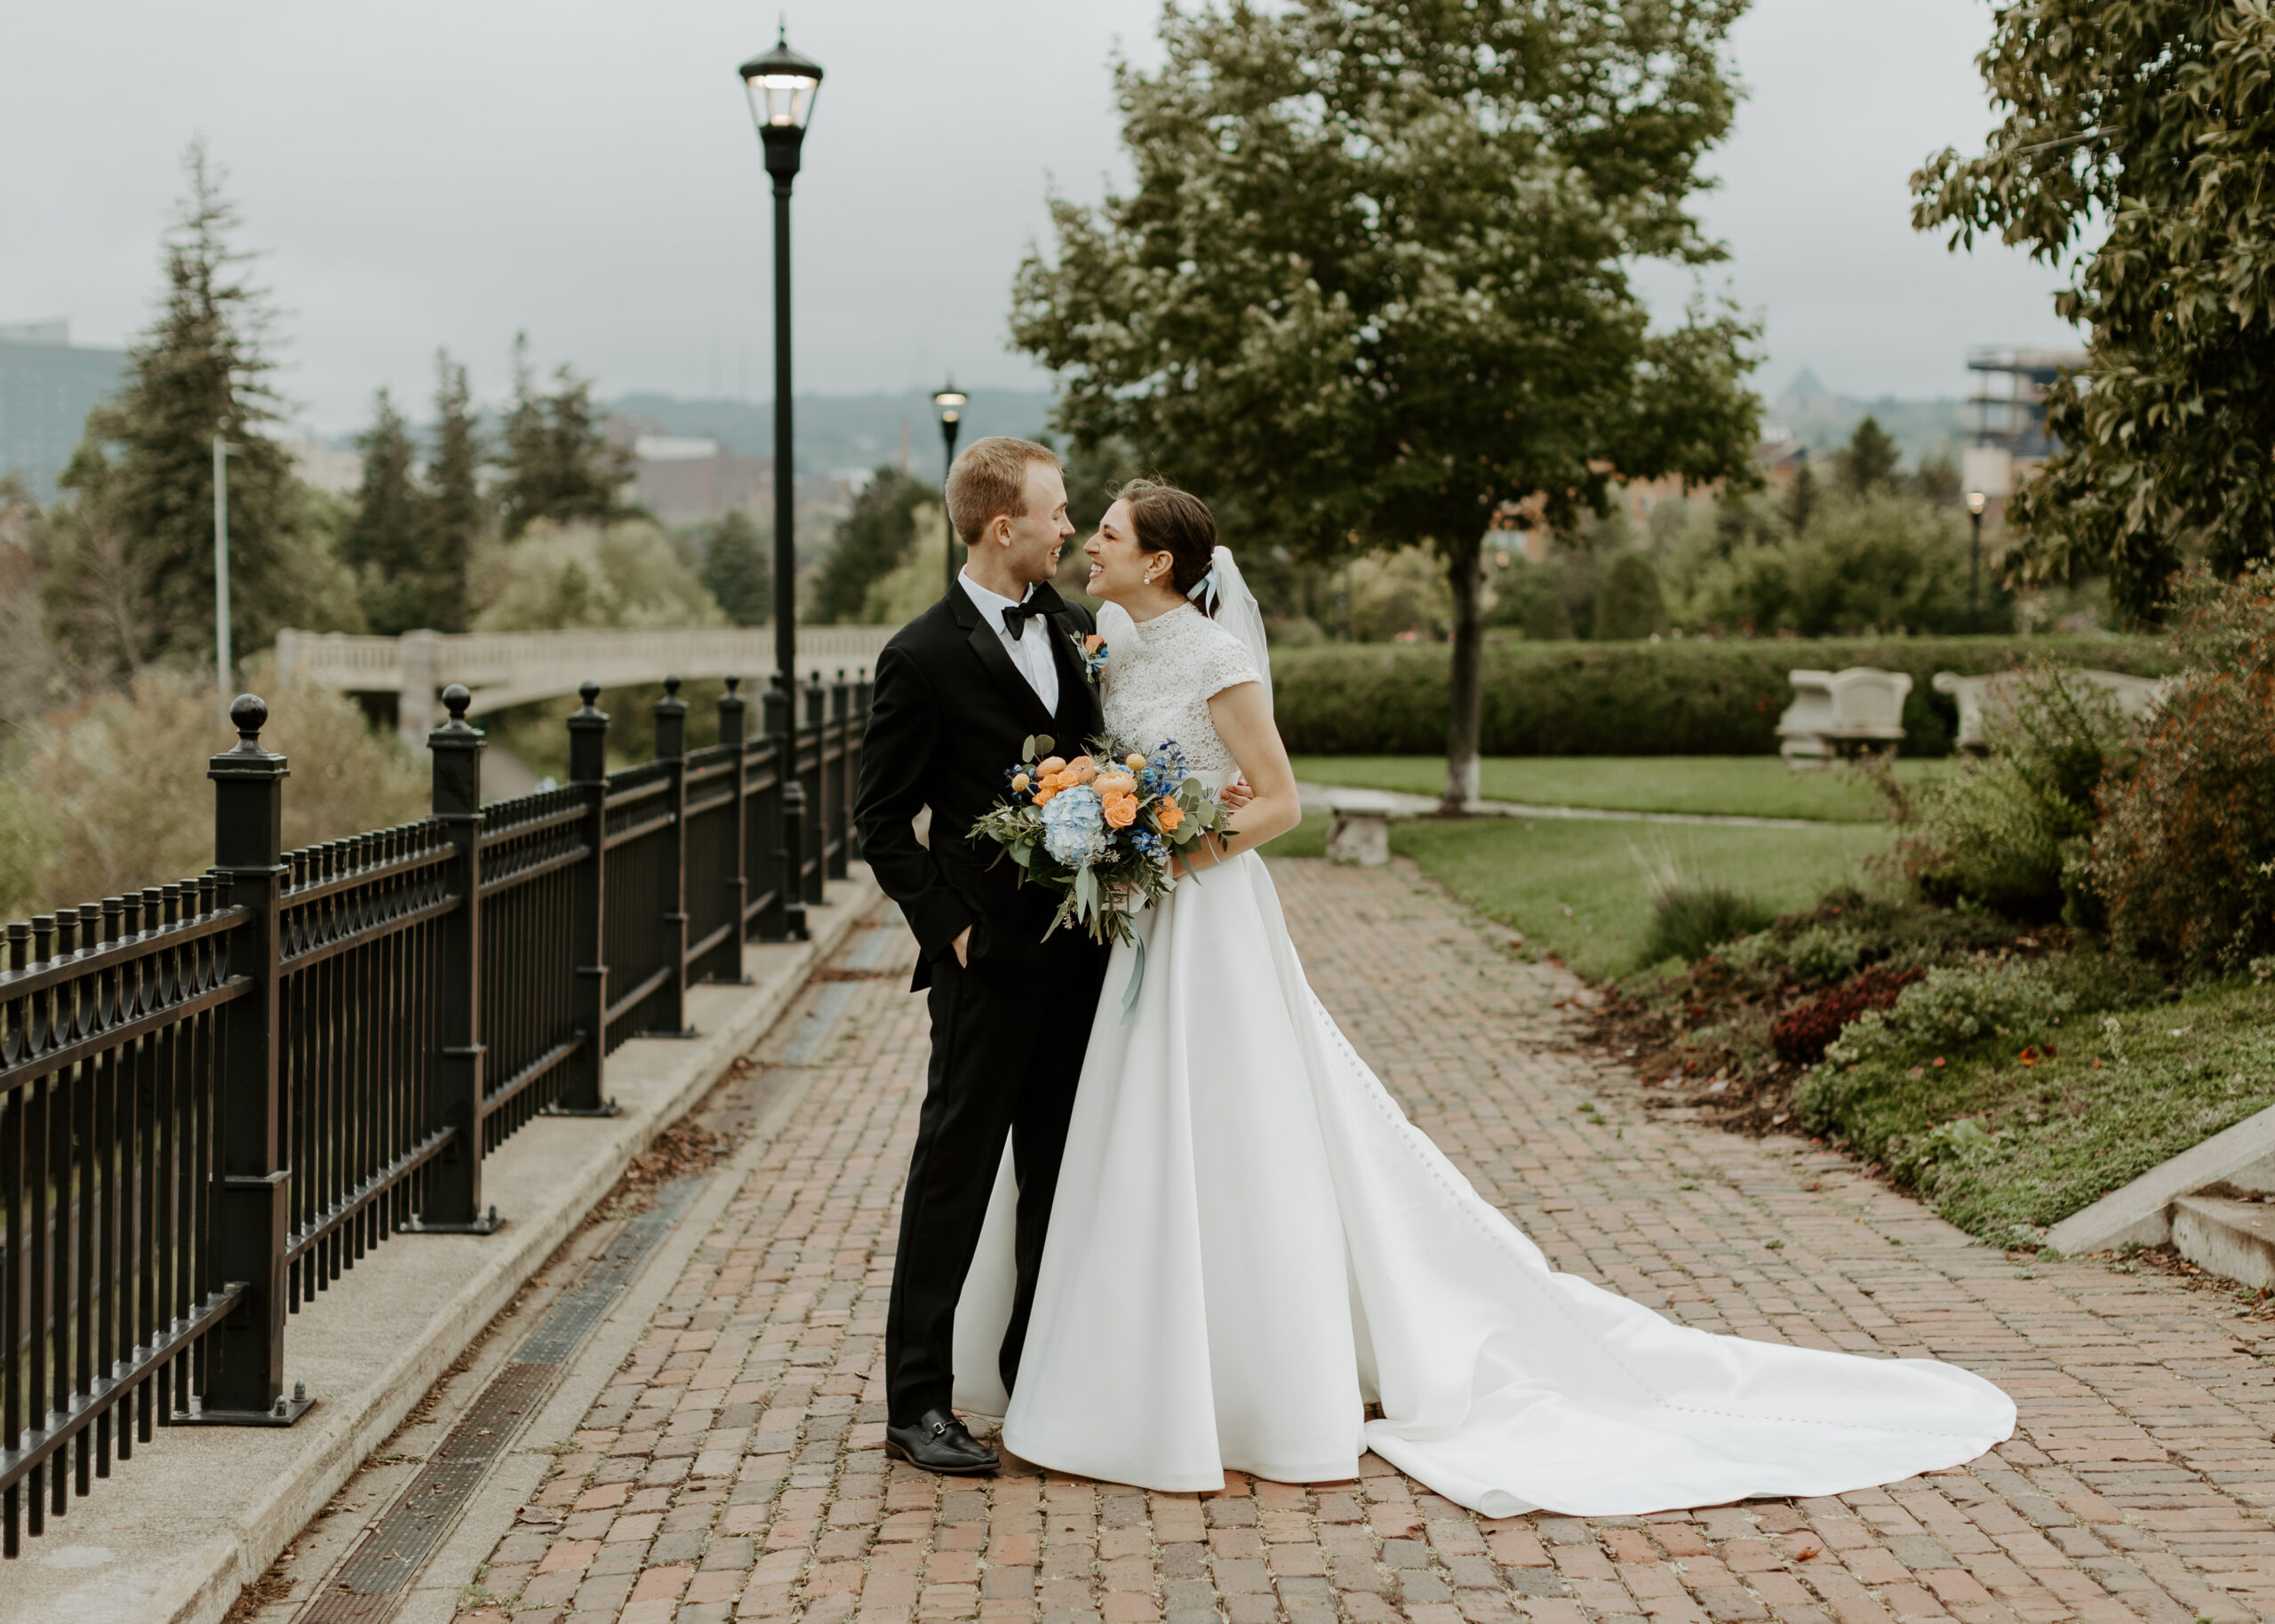 Couple embraces at The Rose Gardens in Duluth, Minnesota after their elopement ceremony photographed by Ashlyn Meys Photography